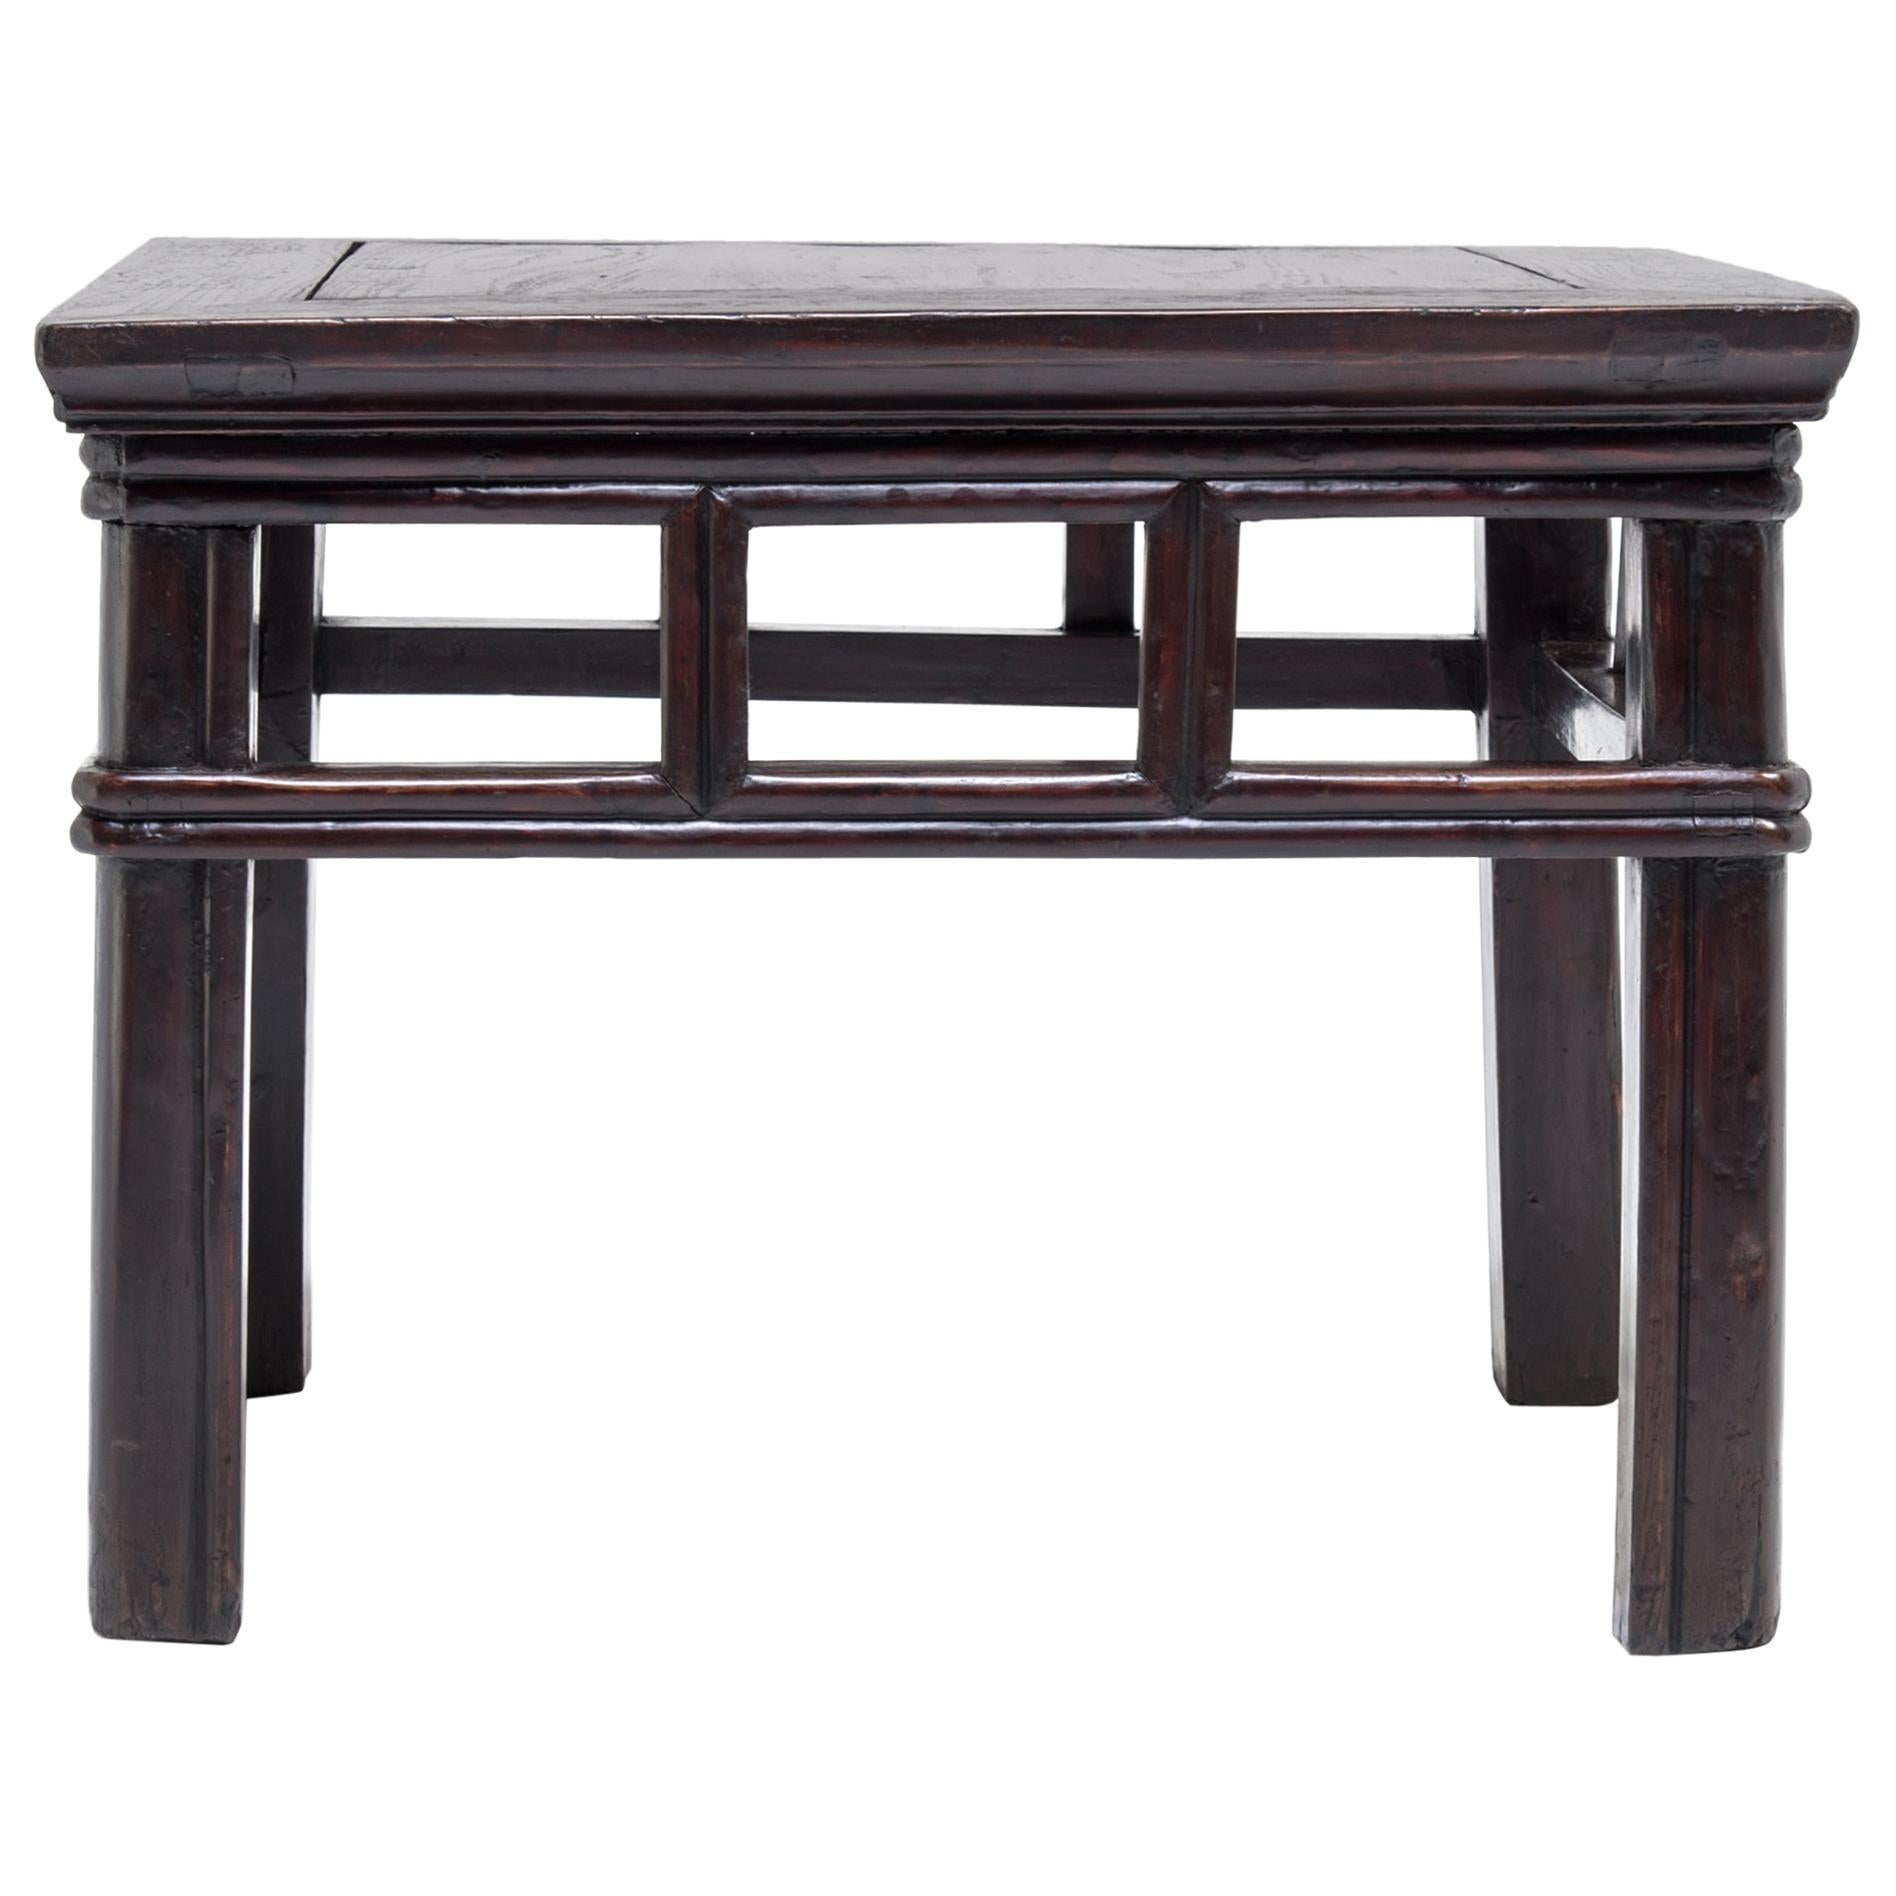 Chinese Black Lacquer Square Stool, c. 1850 For Sale